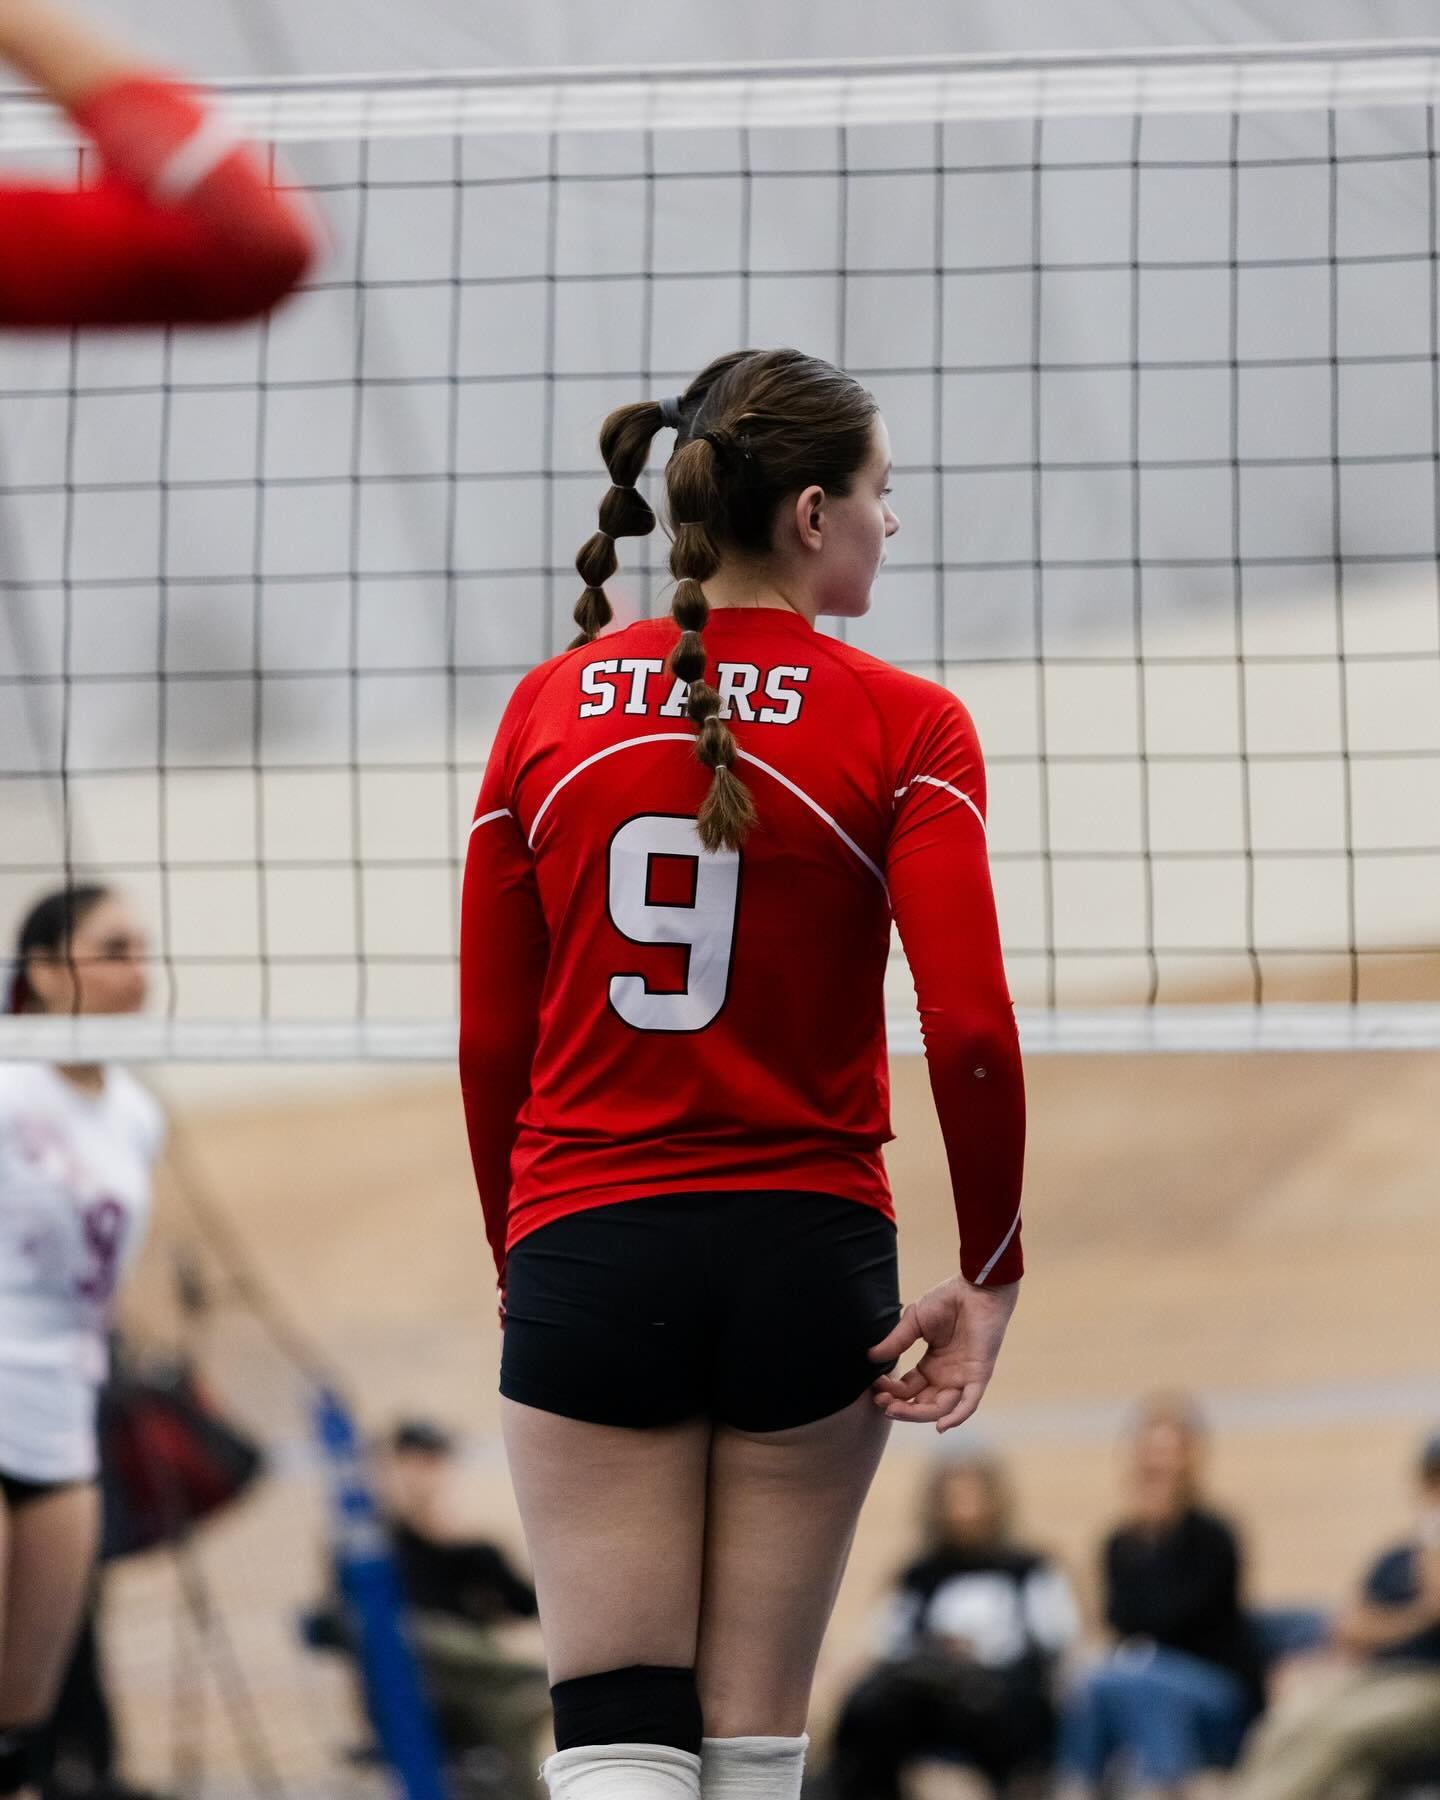 Our U15s are off to Edmonton today for @volleyballcanada Nationals. Best of luck to the team as they compete against teams from across the country 🇨🇦 🌟